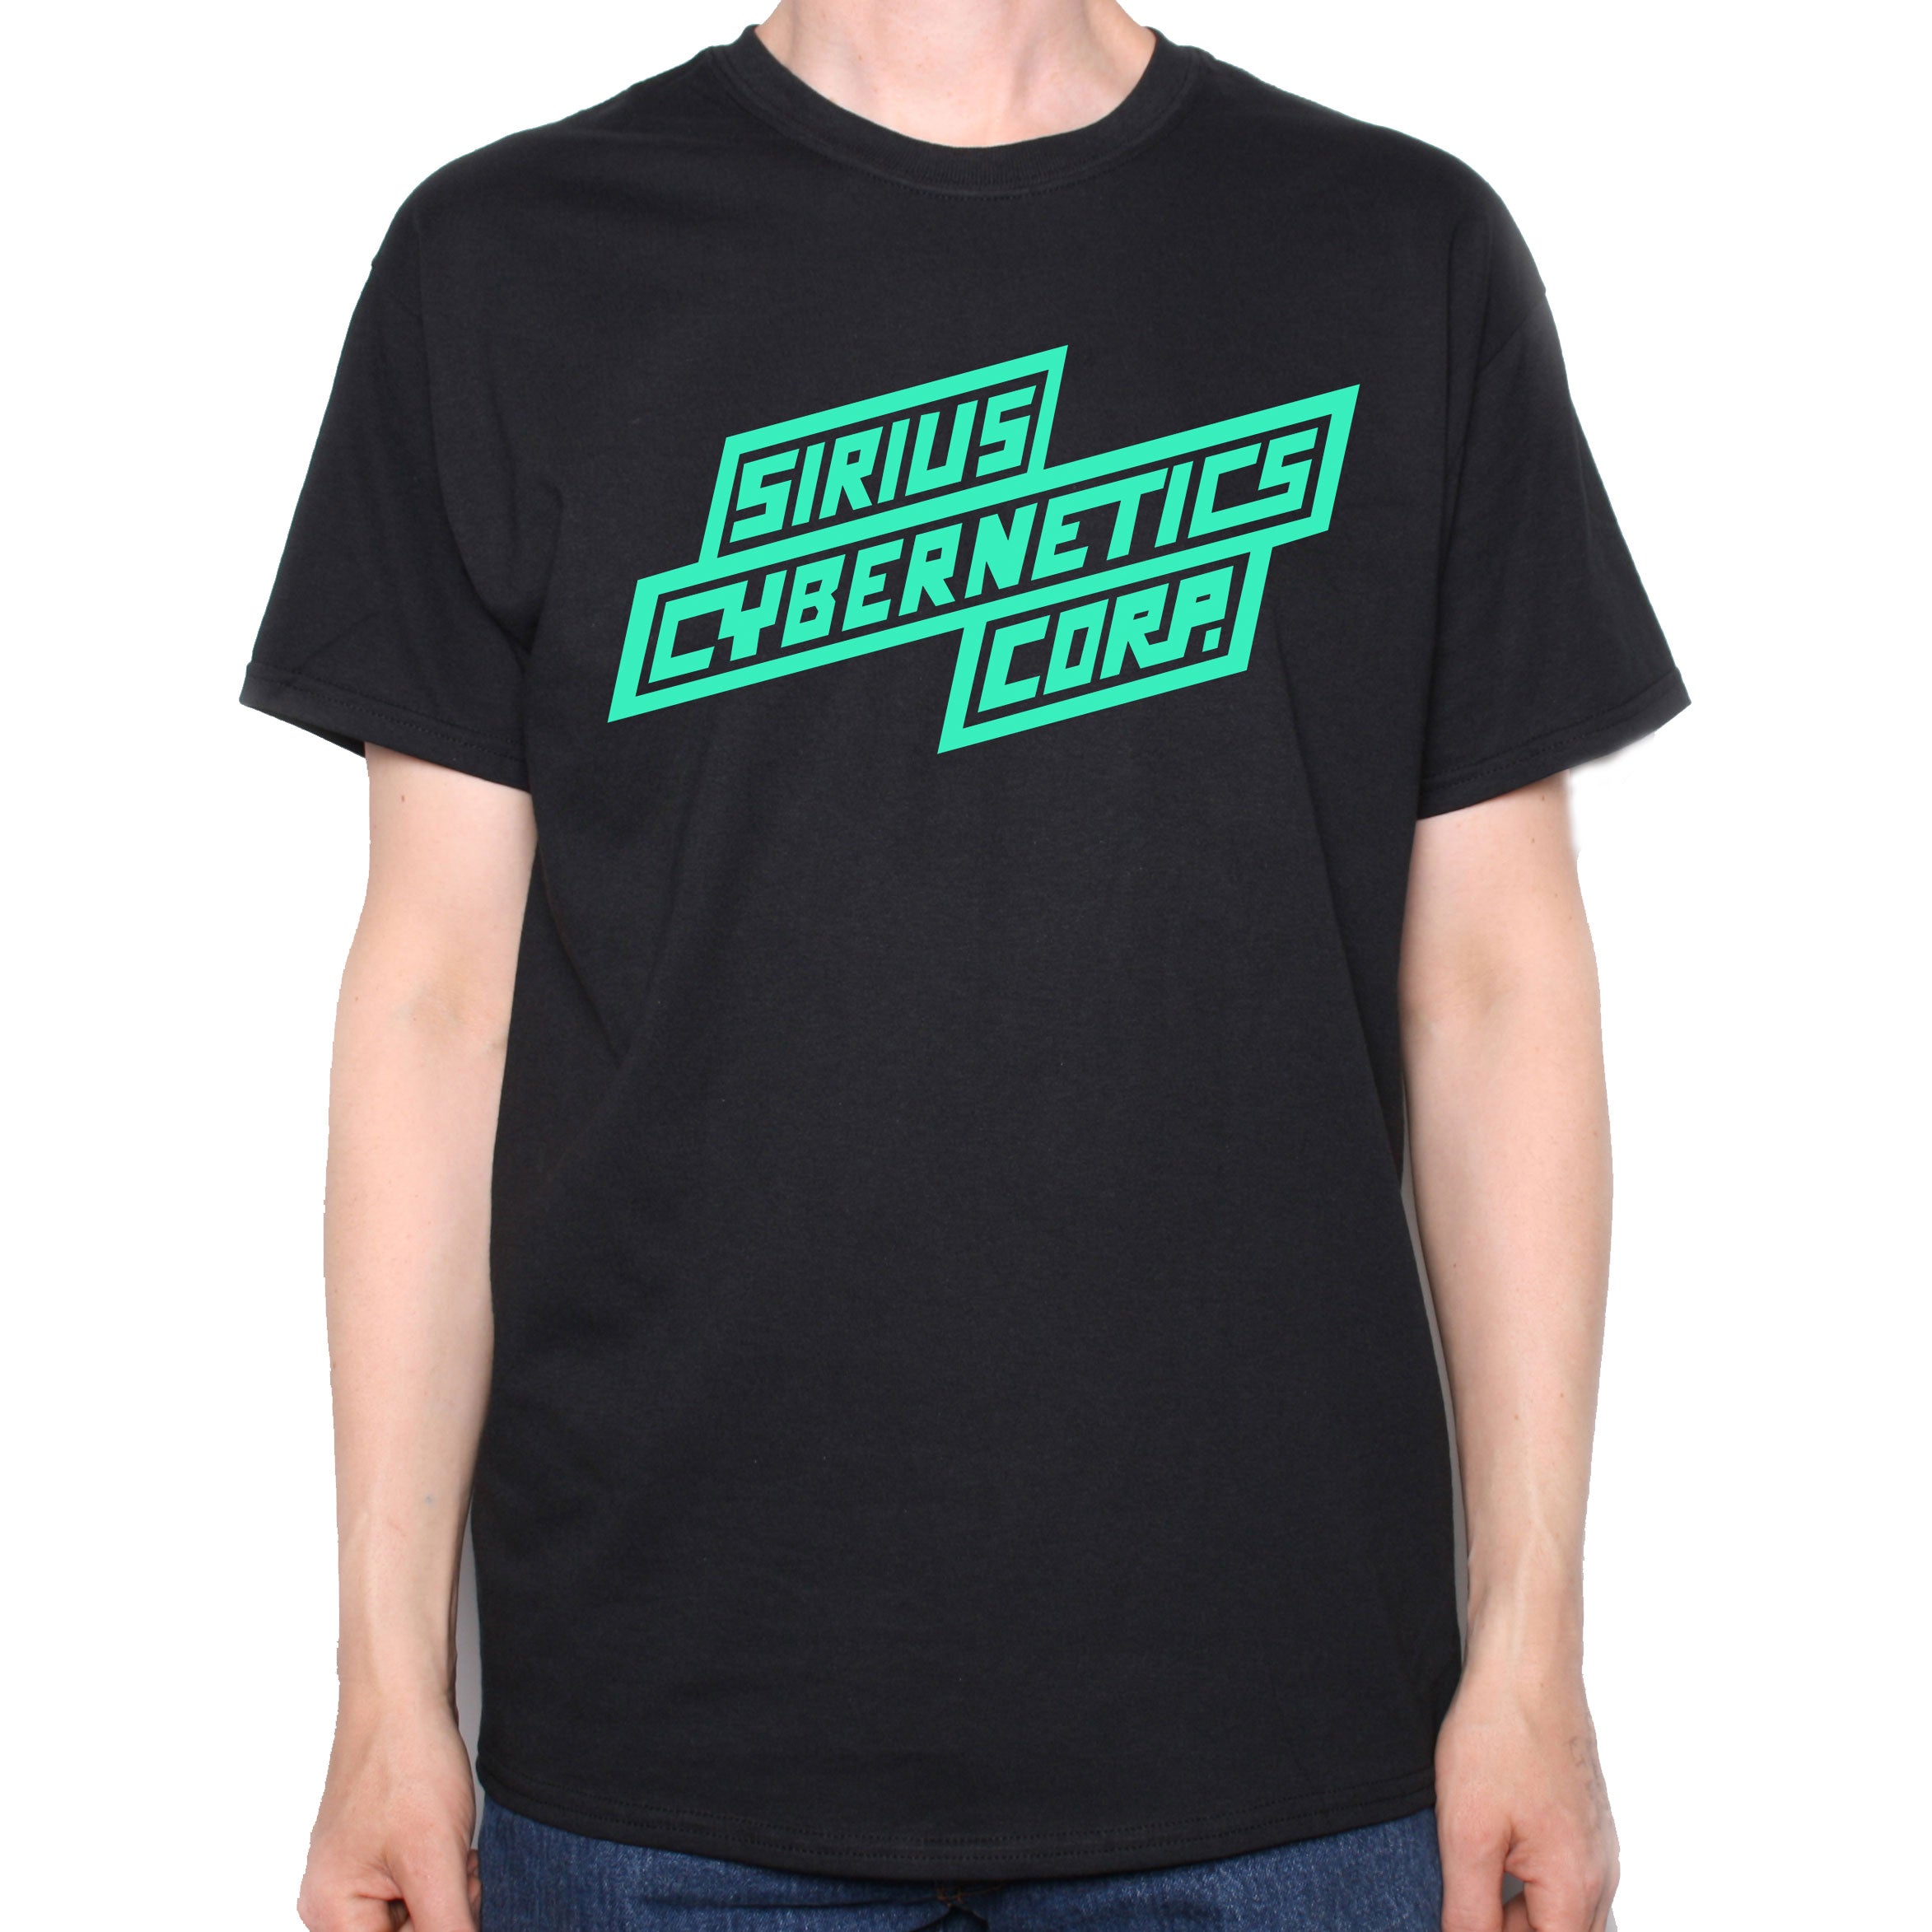 Inspired by Hitchhikers Guide To The Galaxy T Shirt - Sirius Cybernetics Corp.